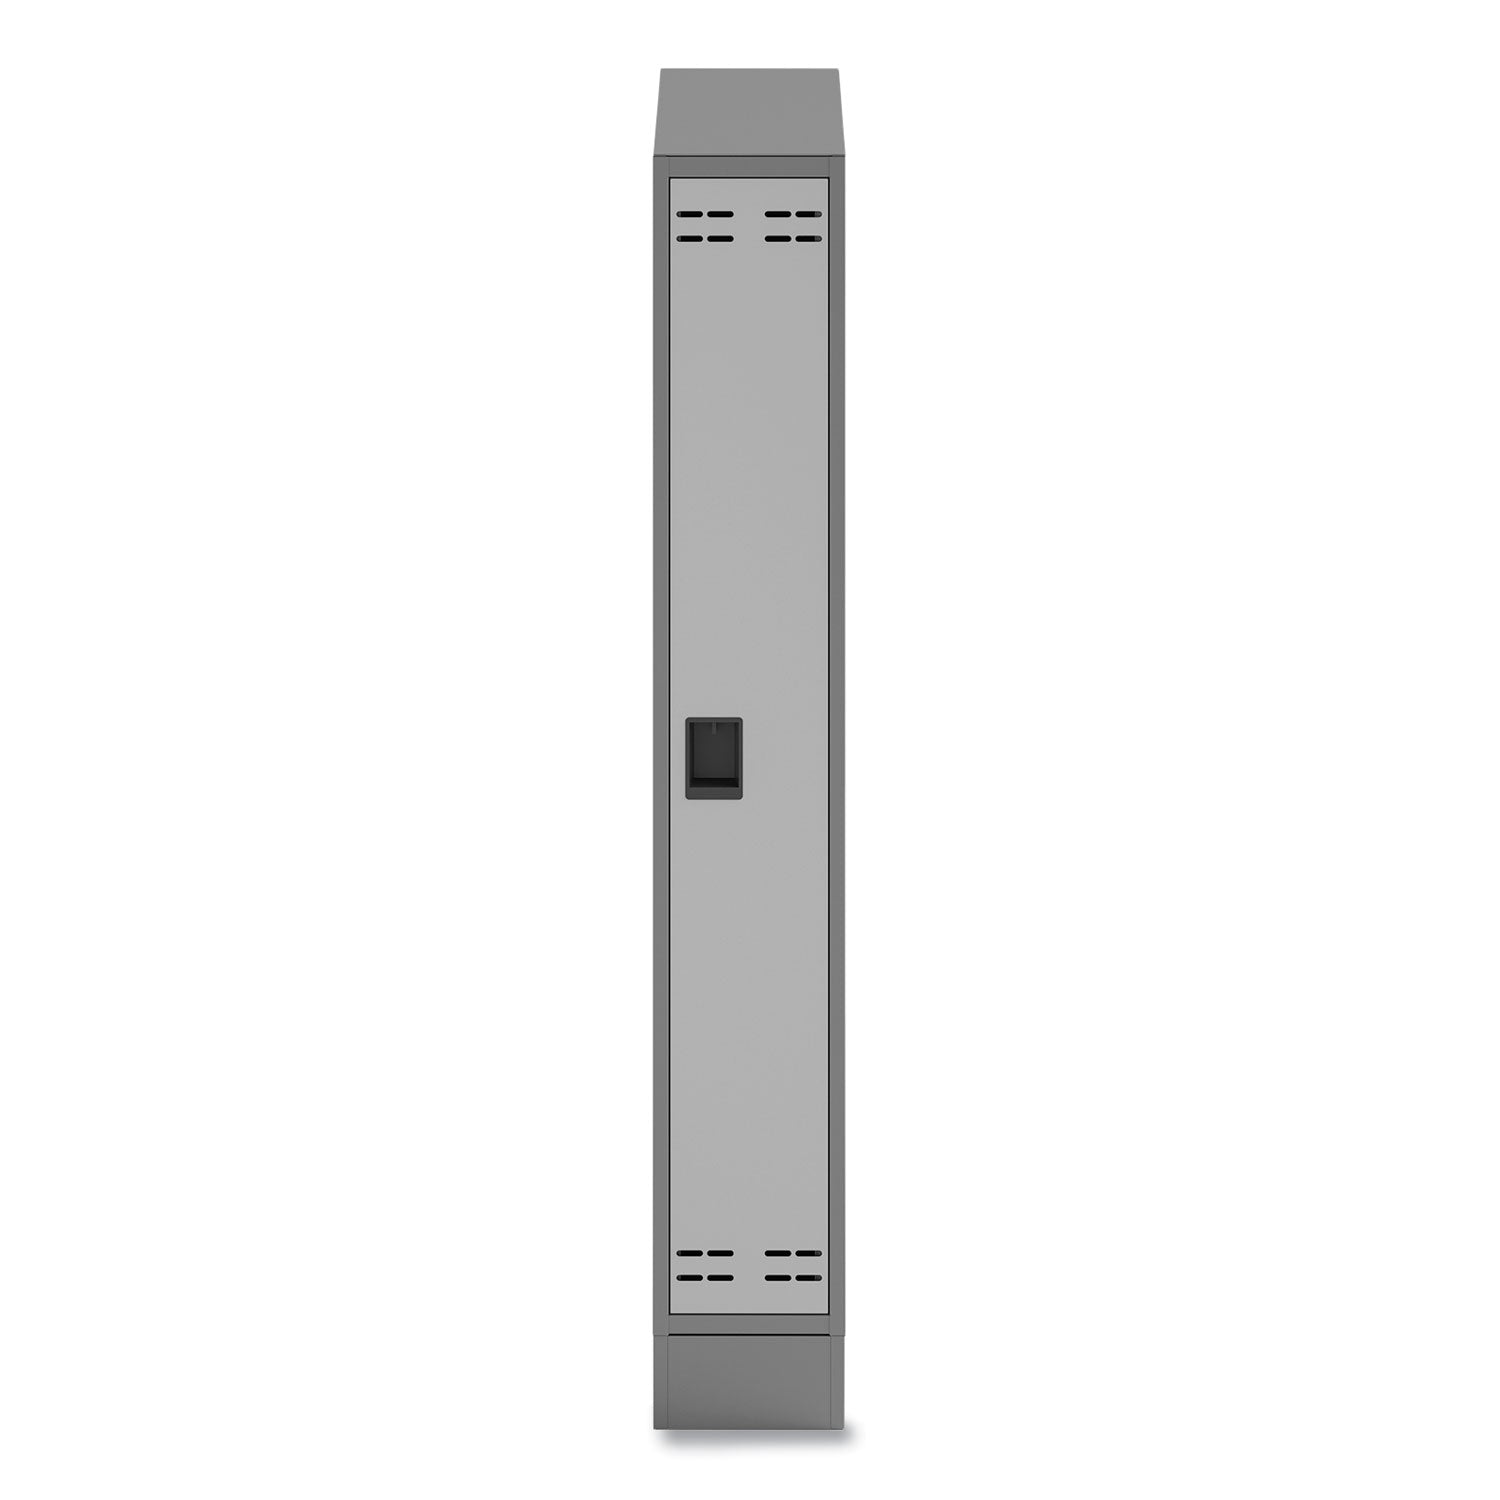 single-continuous-metal-locker-base-addition-117w-x-16d-x-575h-gray-ships-in-1-3-business-days_saf5519gr - 2